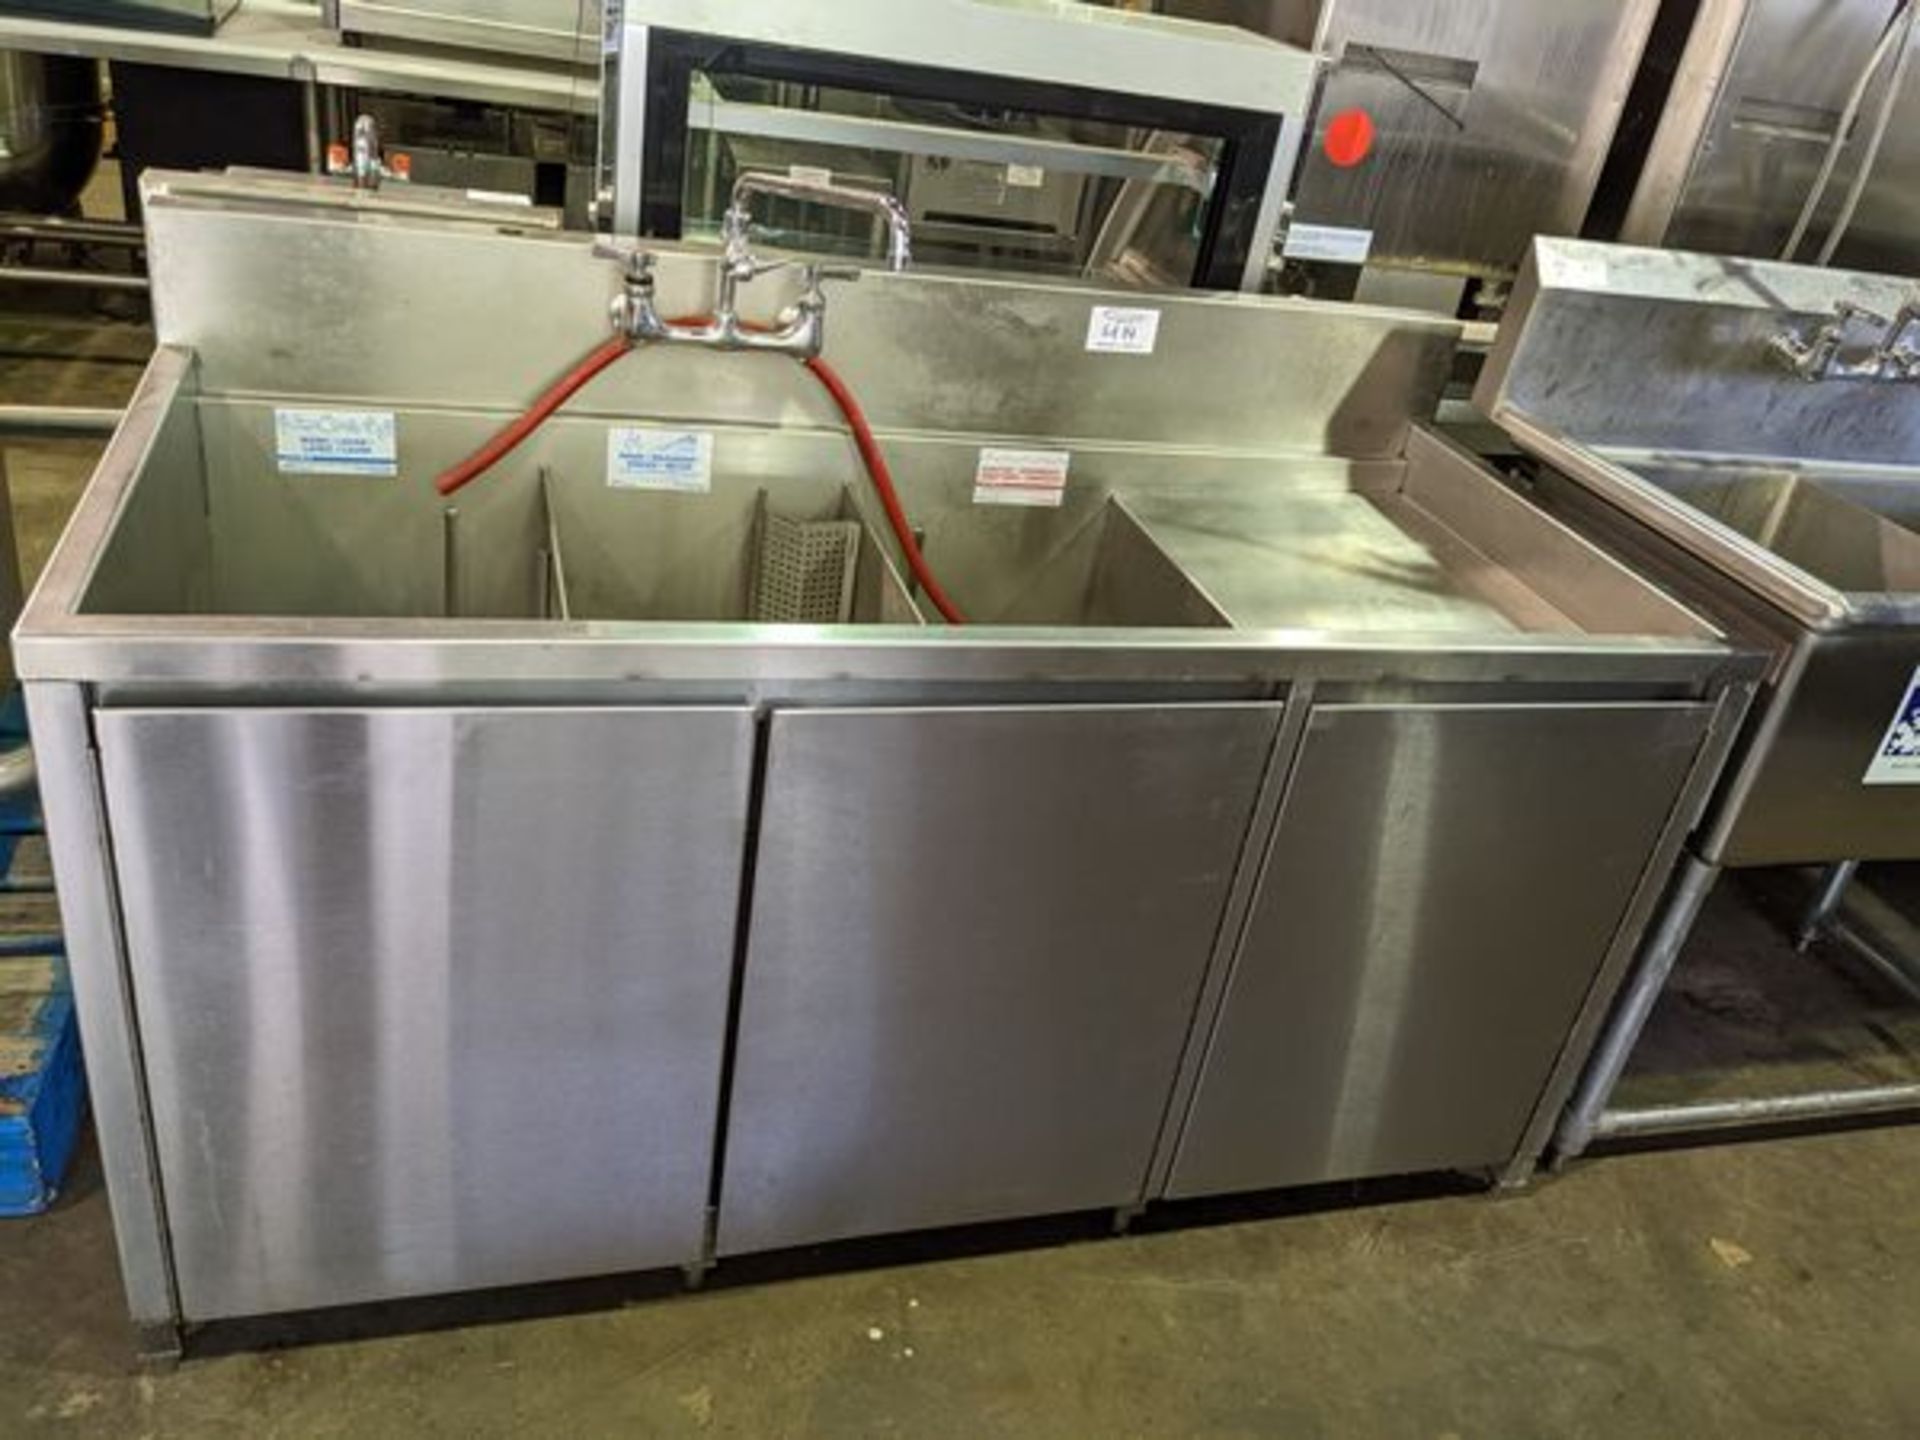 66" Three Well Stainless Steel Sink with Tap and Doors